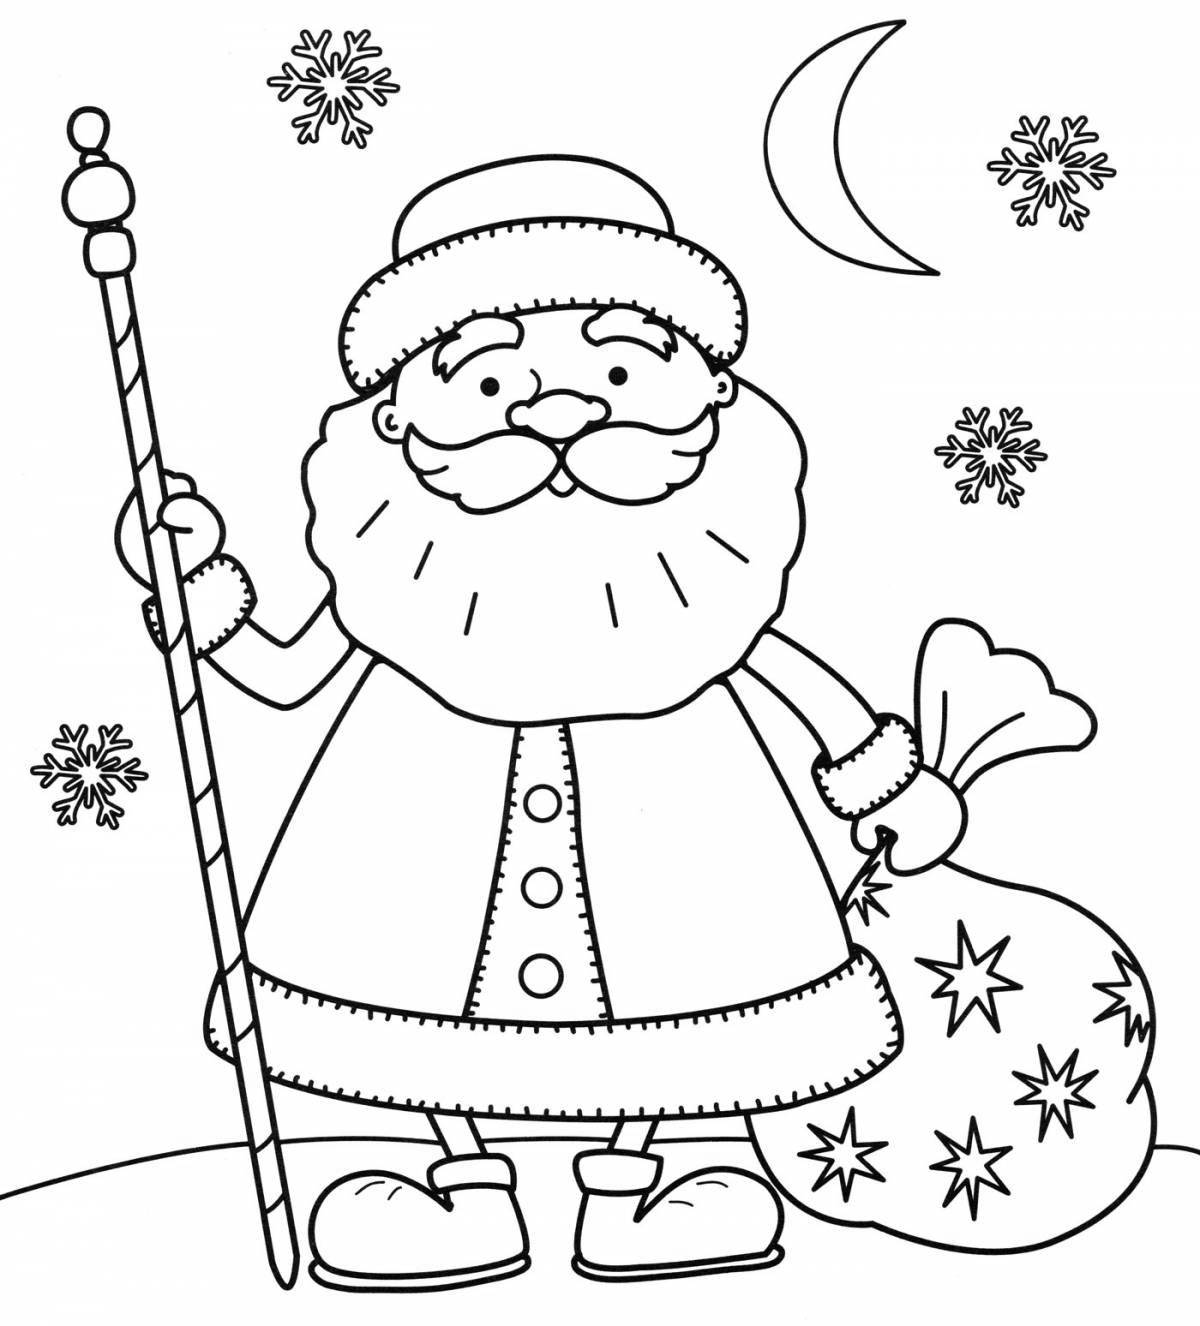 Royal frost coloring page